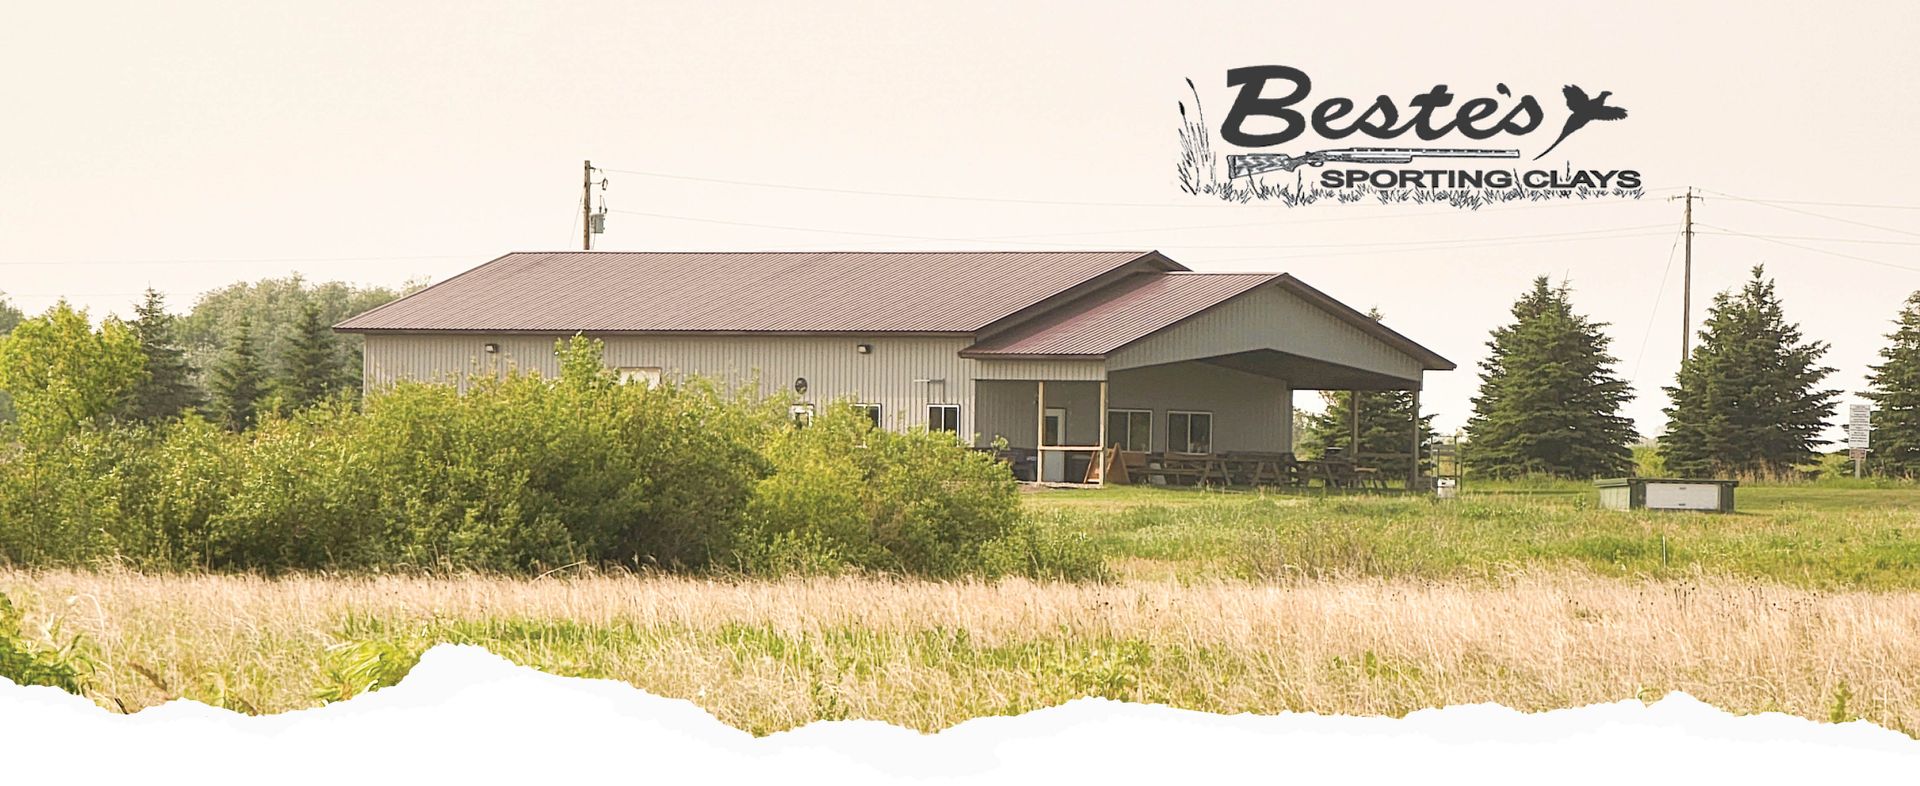 Beste's Sporting Clays and Pheasant Hunting Preserve